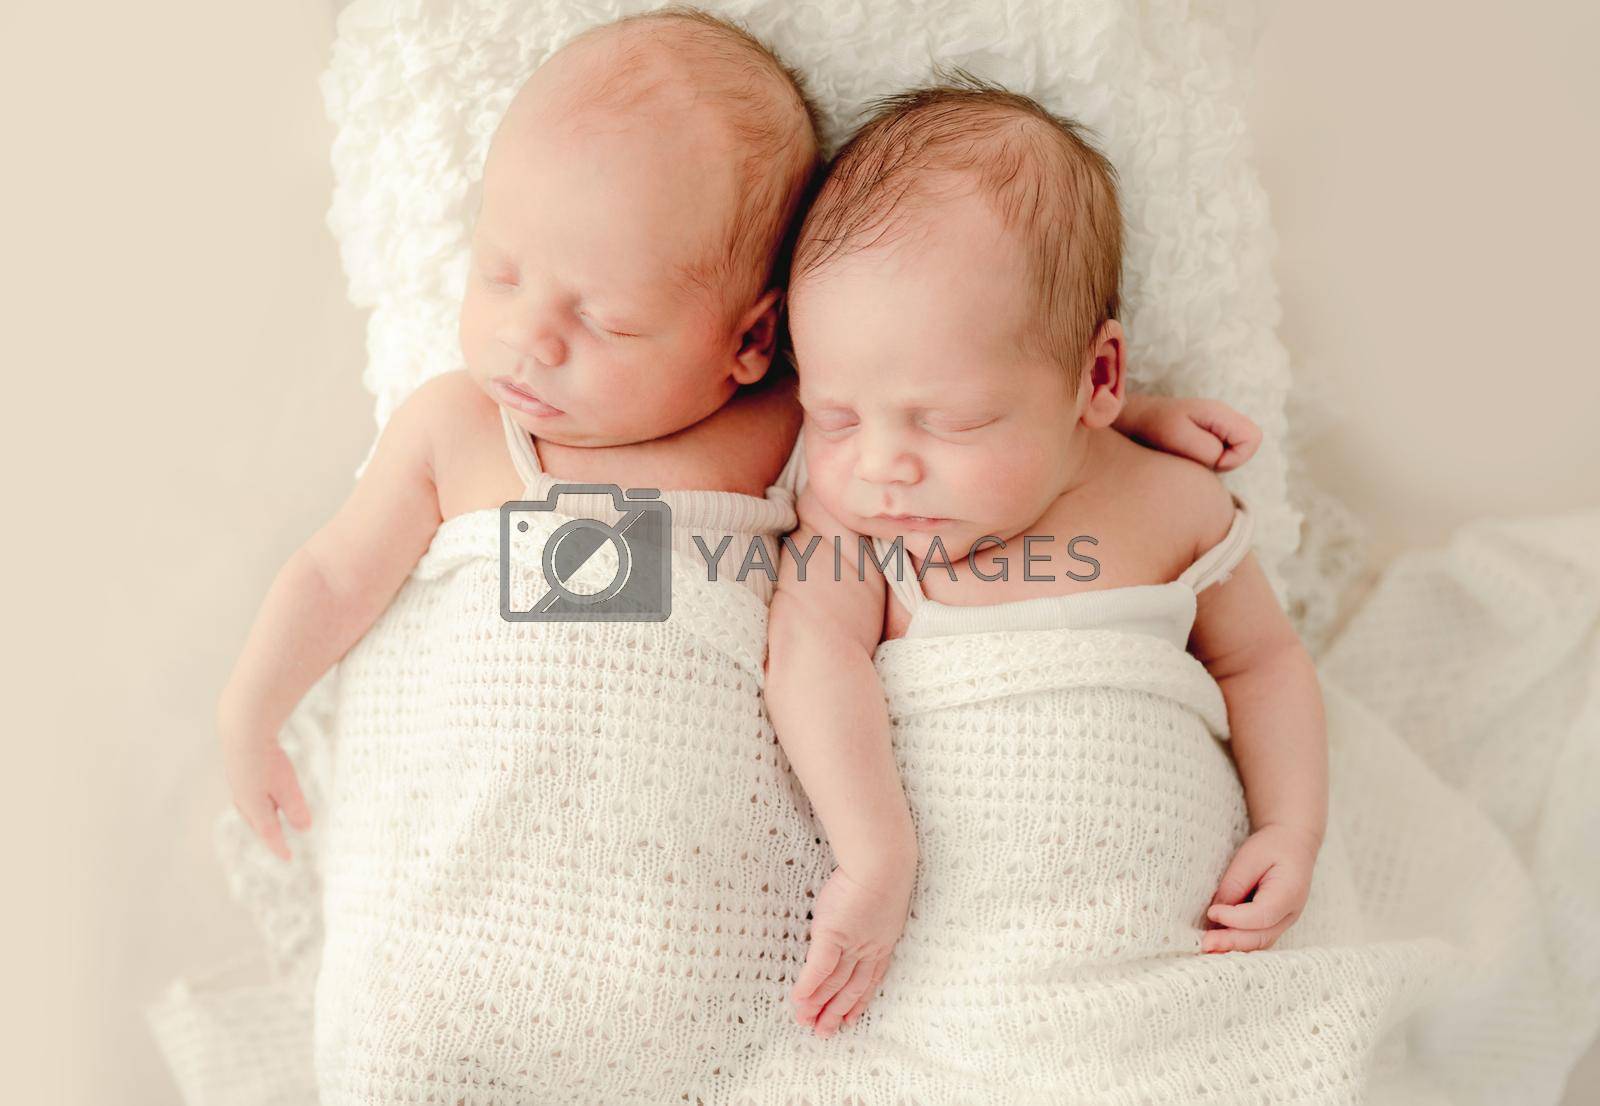 Twins newborn babies sleeping in tiny bed hugging each other studio portrait. Siblings brothers infant children napping together